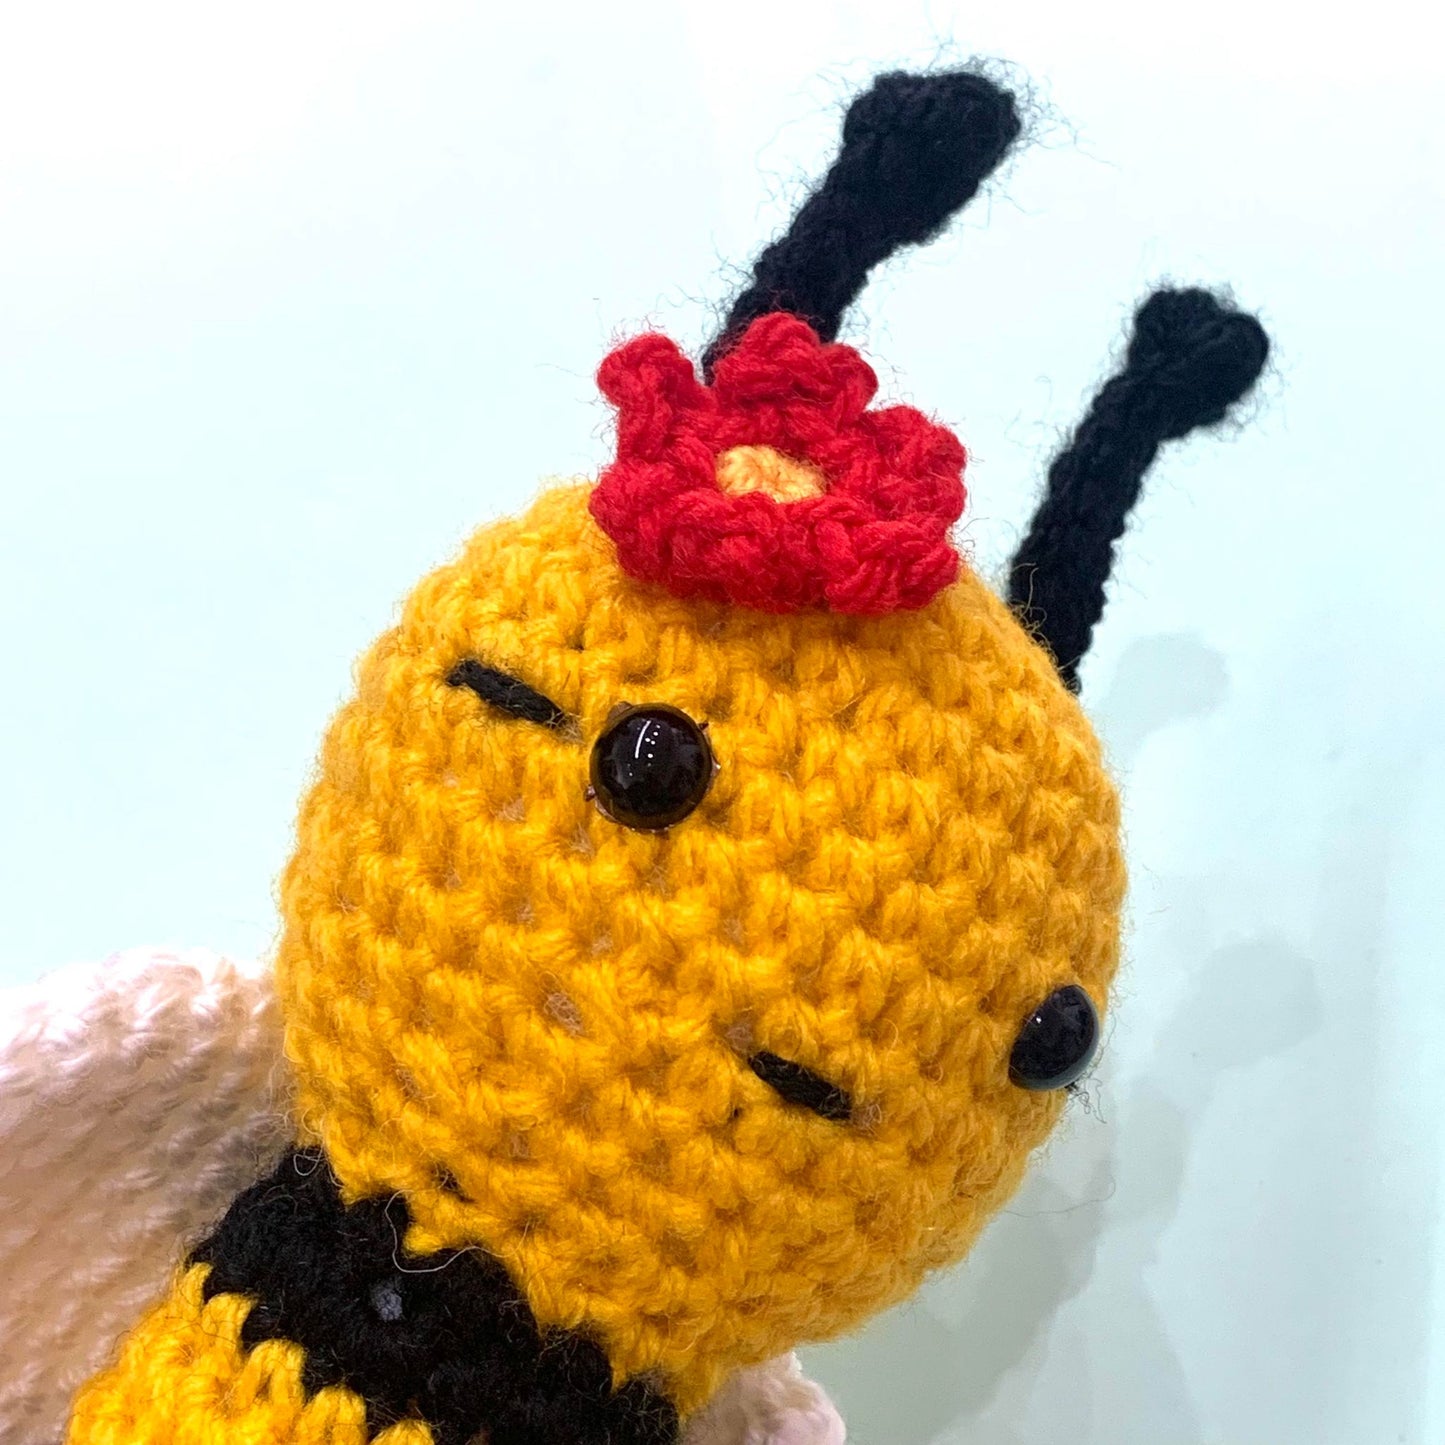 BEAKNITS - CROCHETED BUMBLE BEE- Red Flower